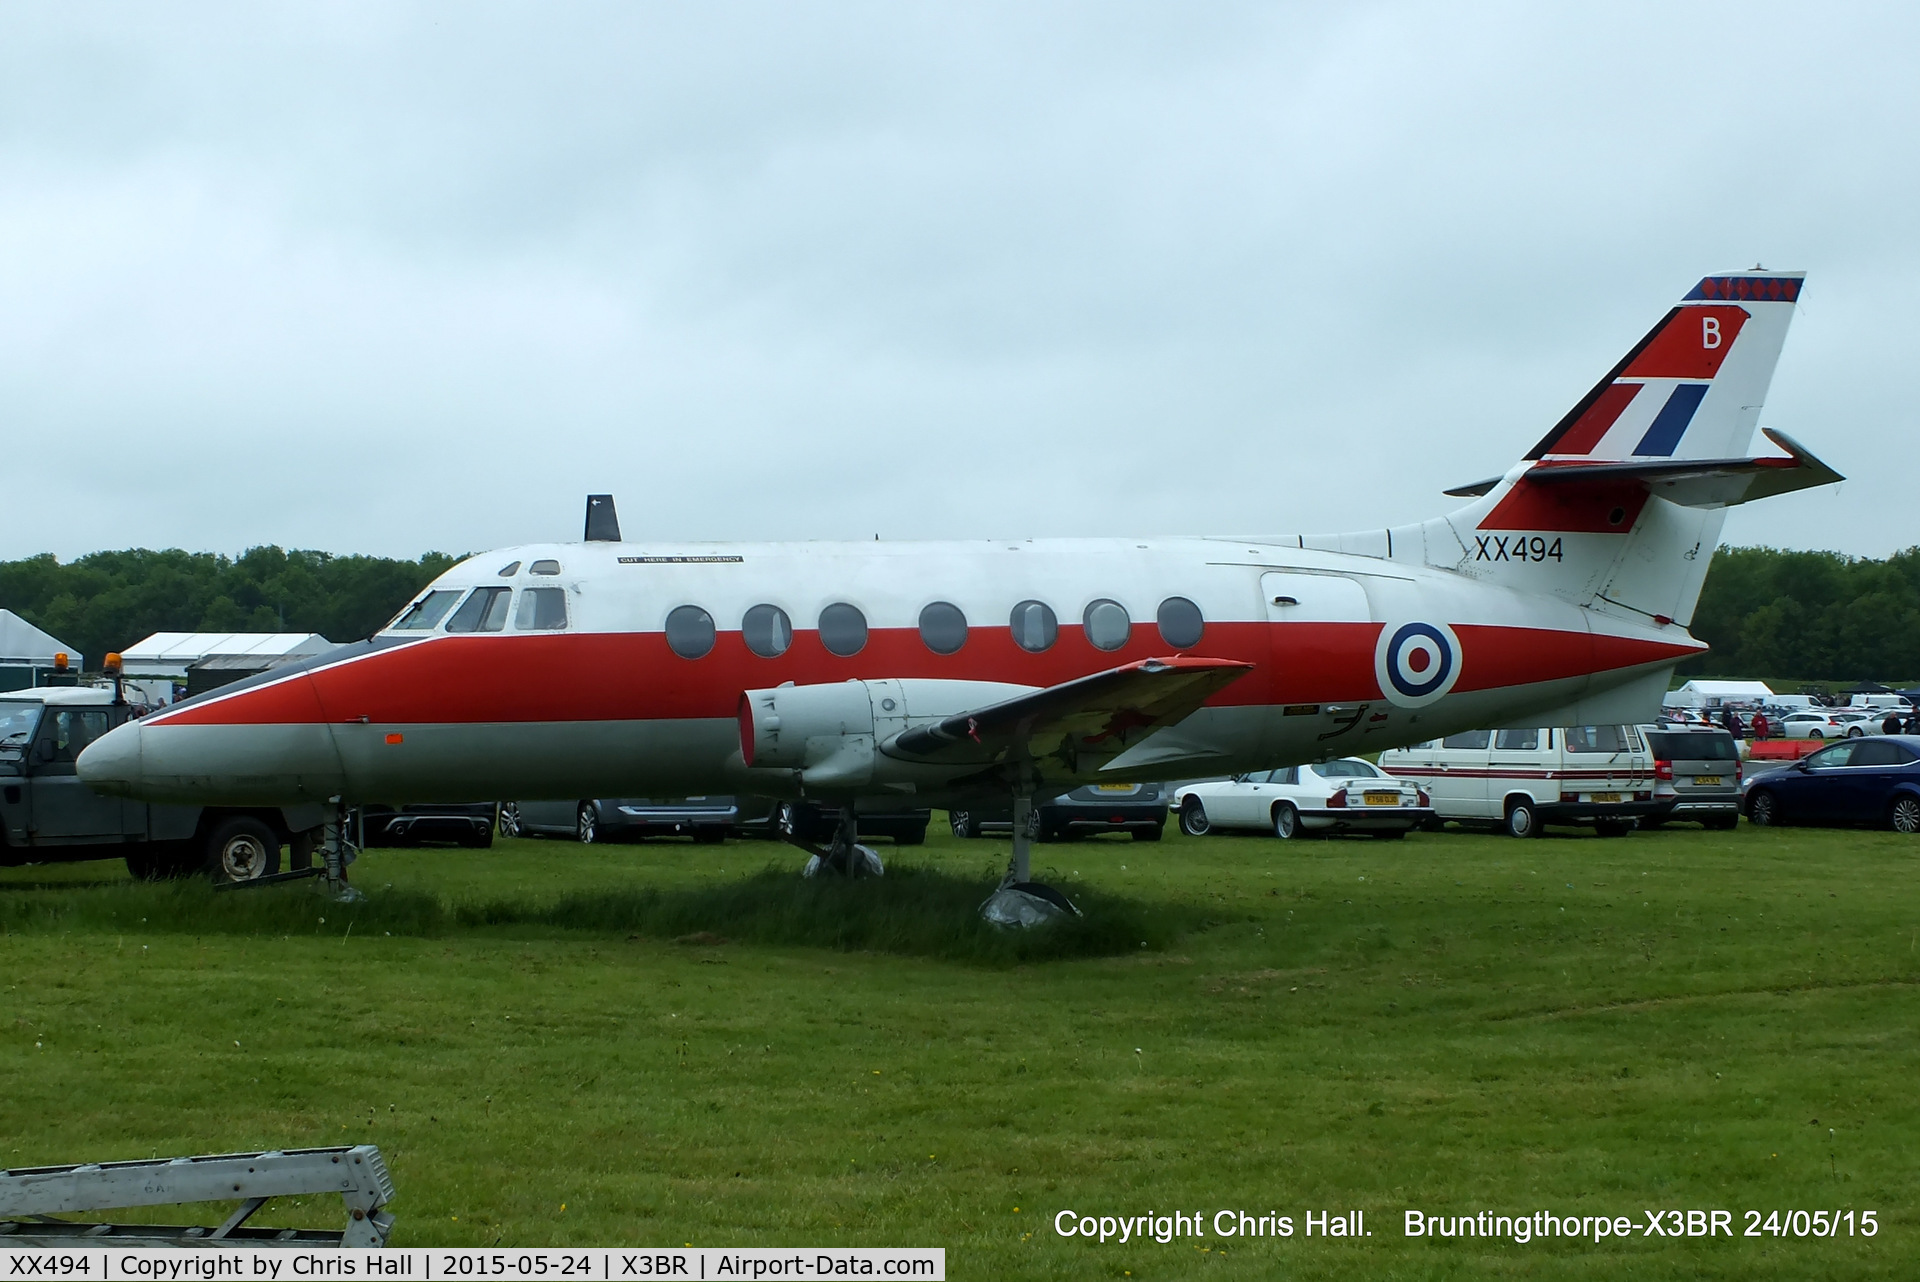 XX494, 1975 Scottish Aviation HP-137 Jetstream T.1 C/N 422, at the Cold War Jets Open Day 2015